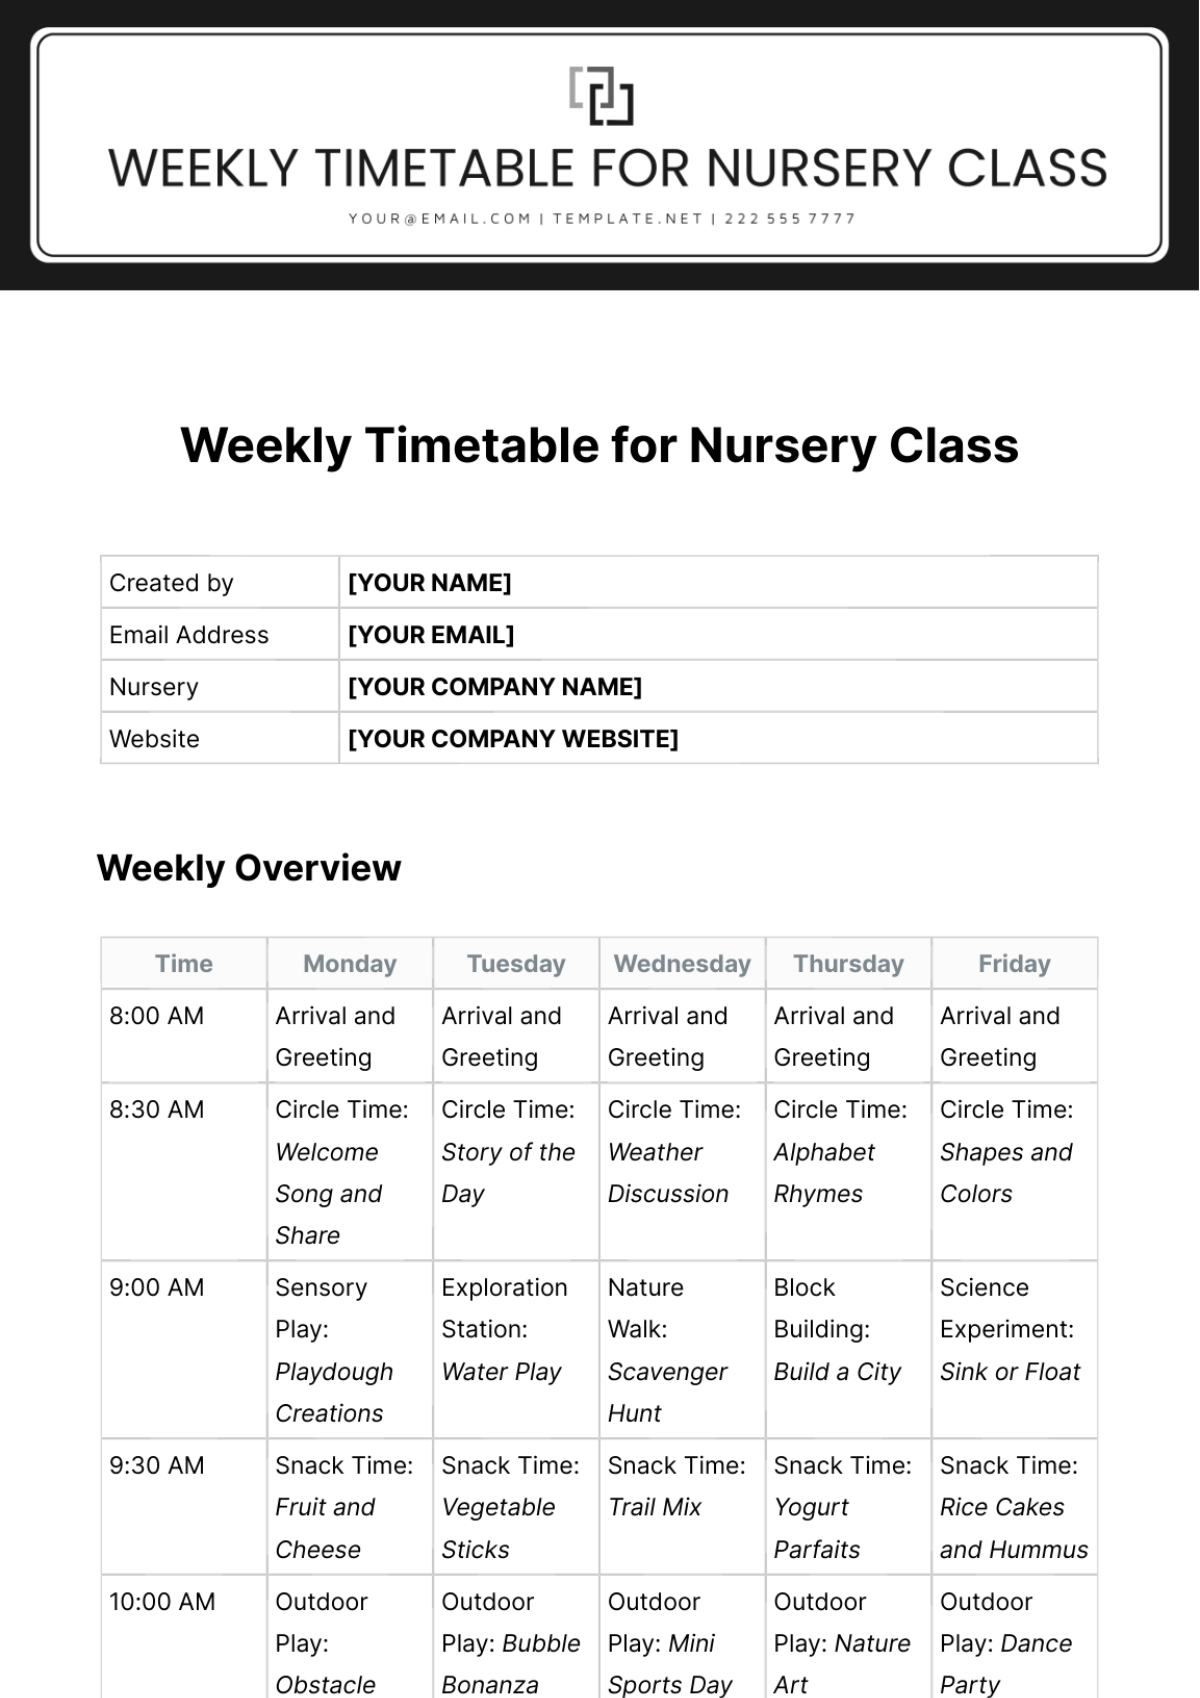 Free Weekly Timetable for Nursery Class Template